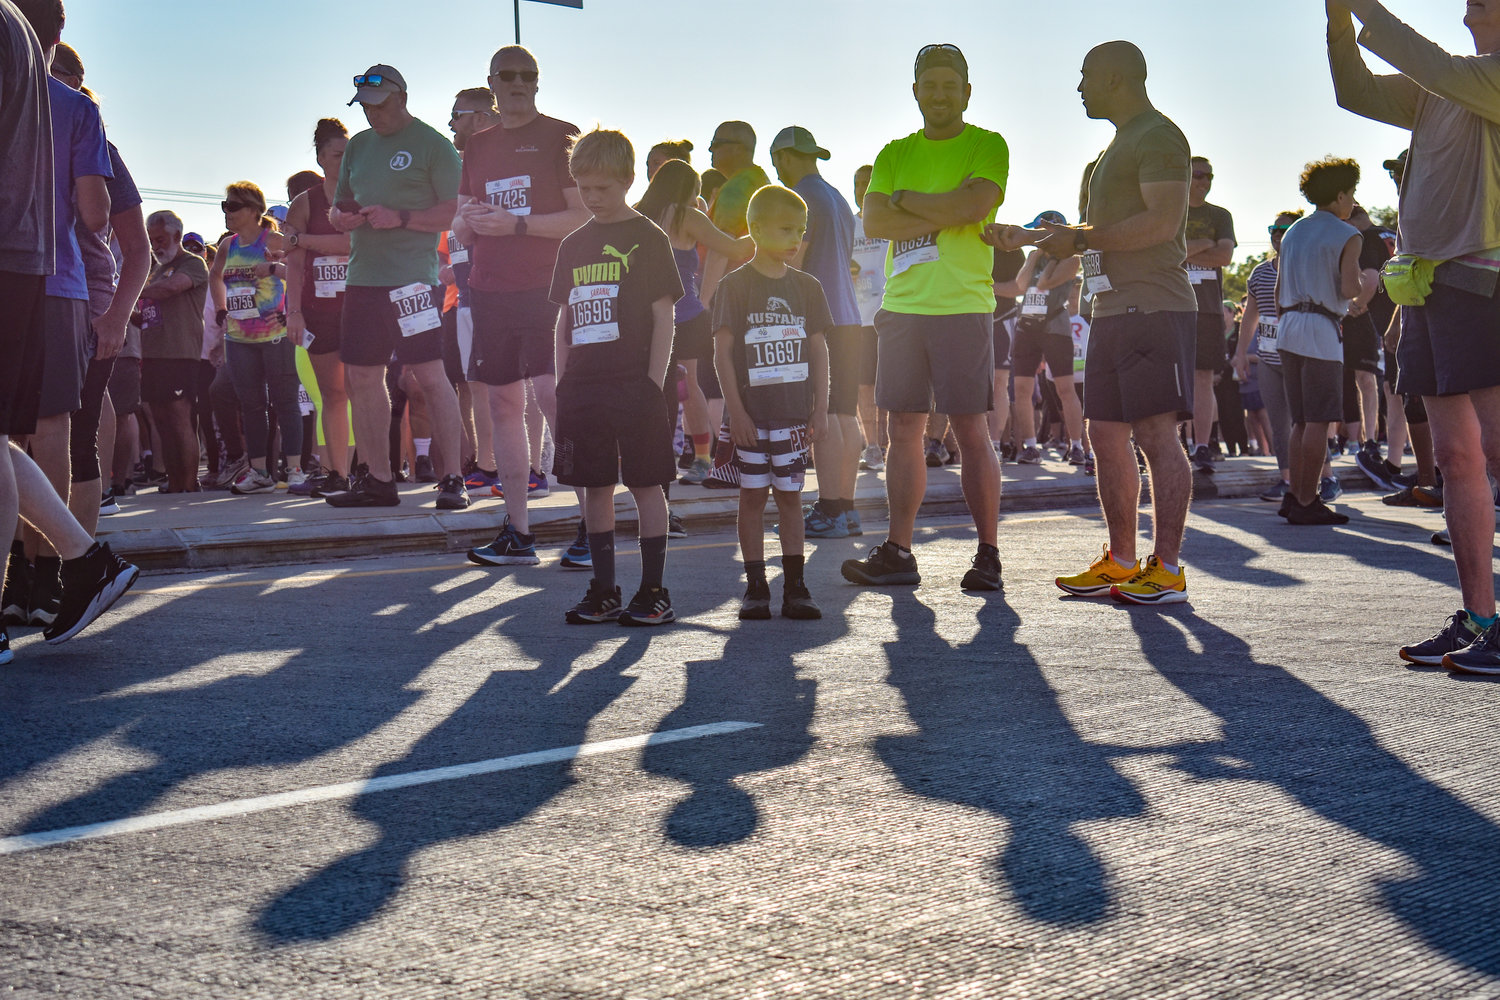 Competitors young and old took part in the 2022 Boilermaker 5K in Utica on July 10.